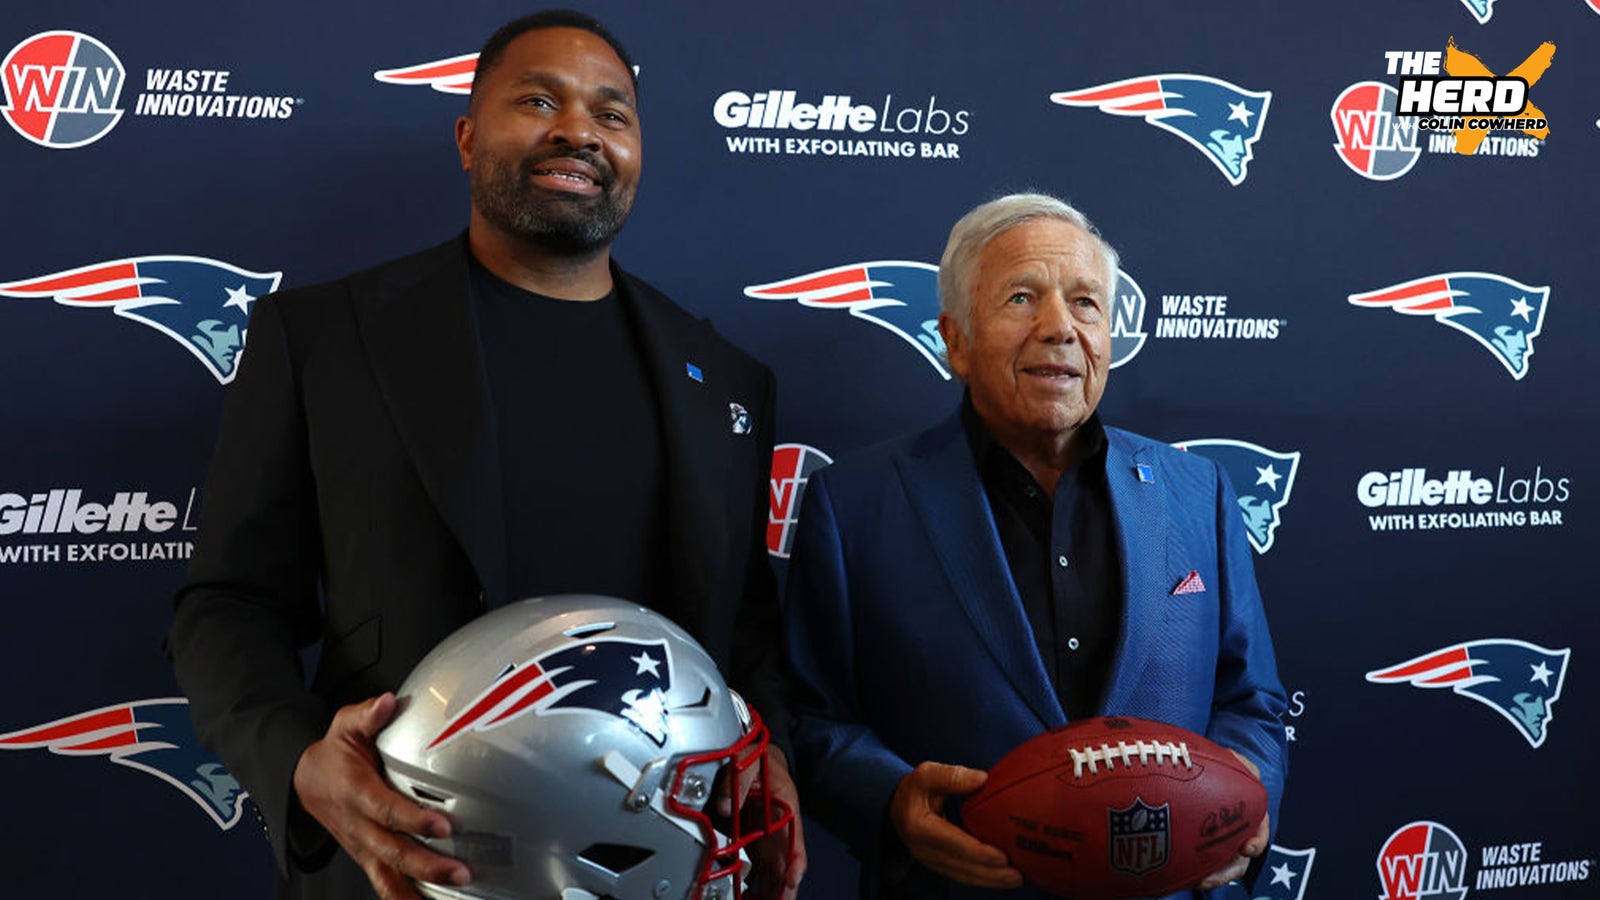 What are the expectations for Jerod Mayo as Patriots head coach?